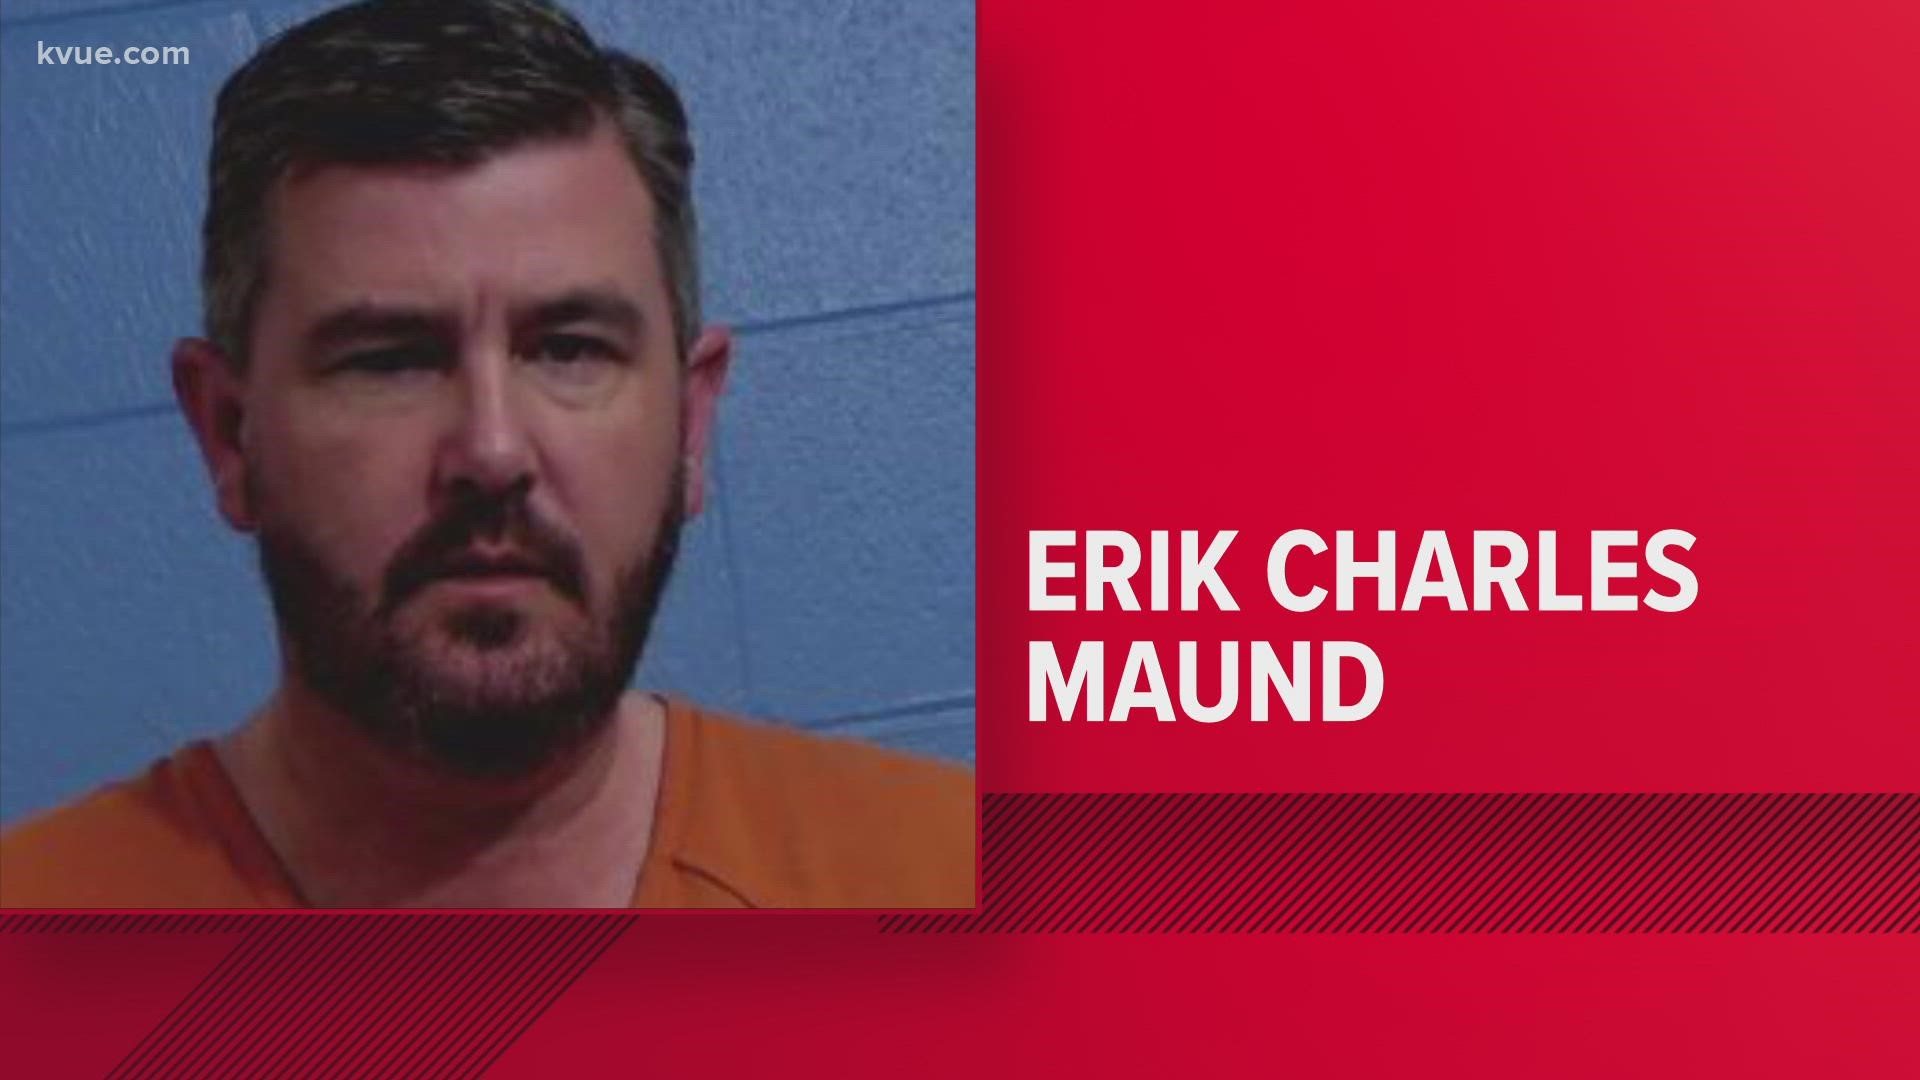 Erik Charles Maund and three other men are facing a federal indictment.